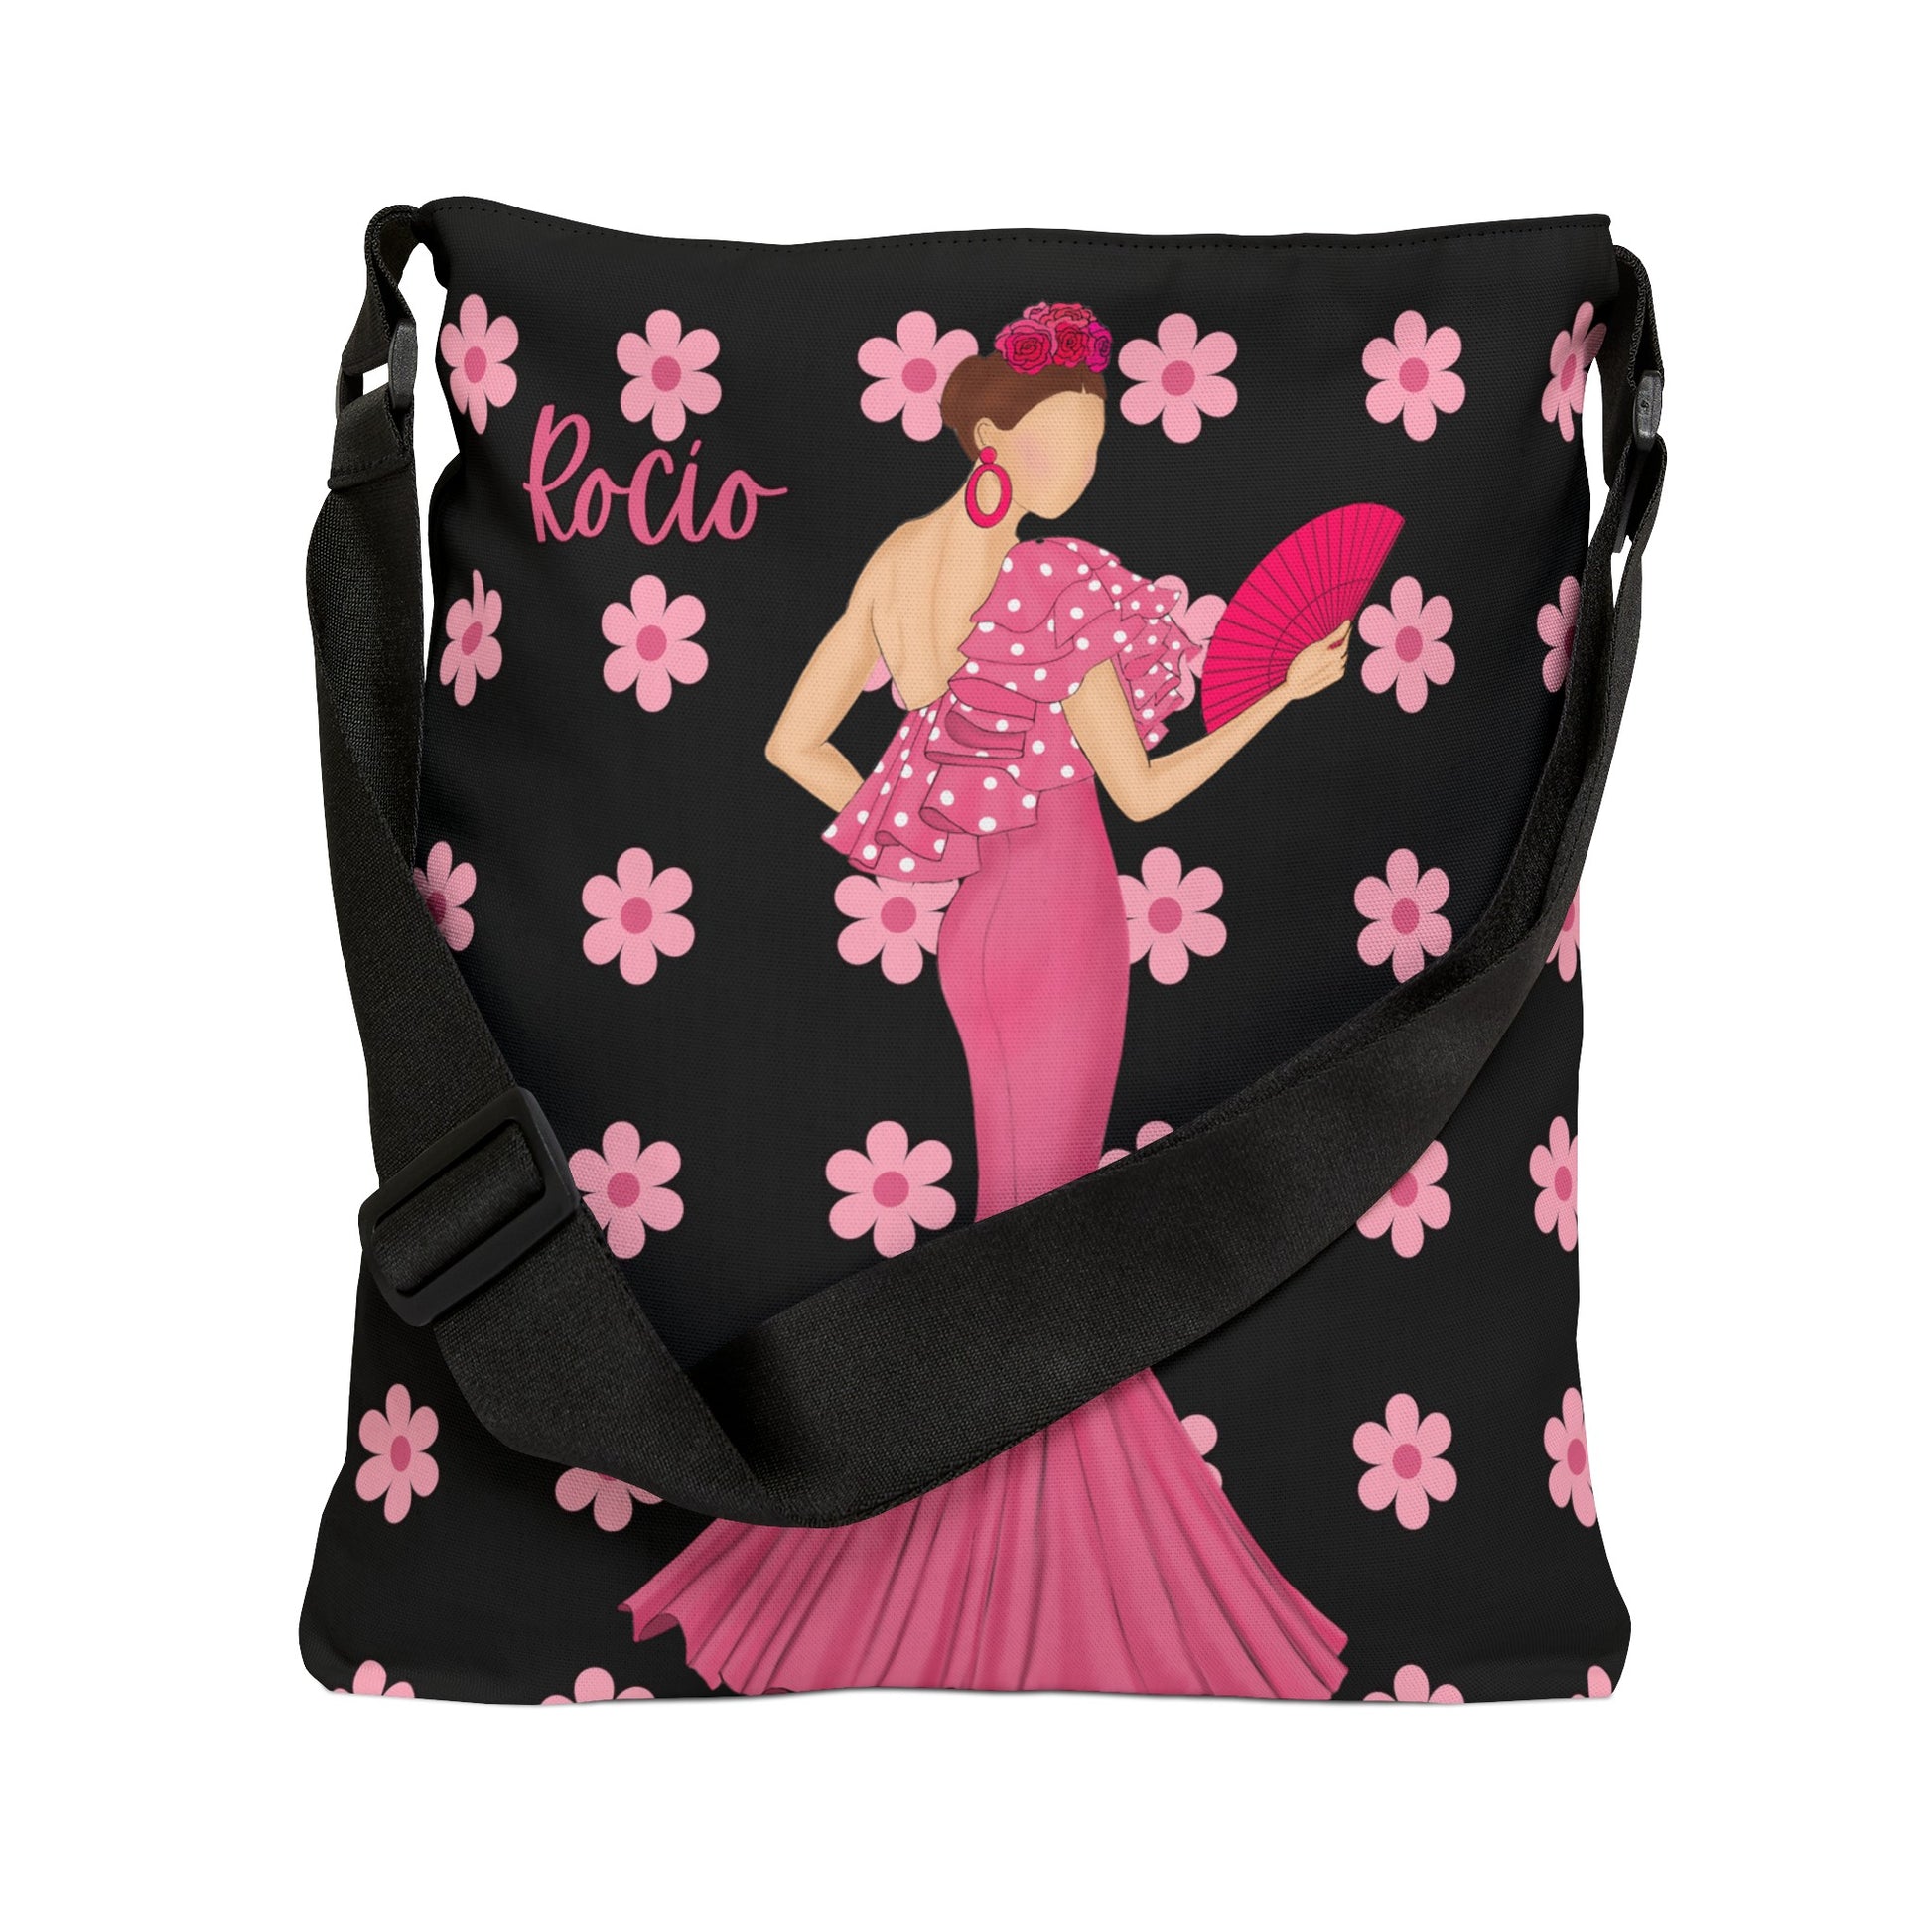 a black and pink purse with a woman holding a fan